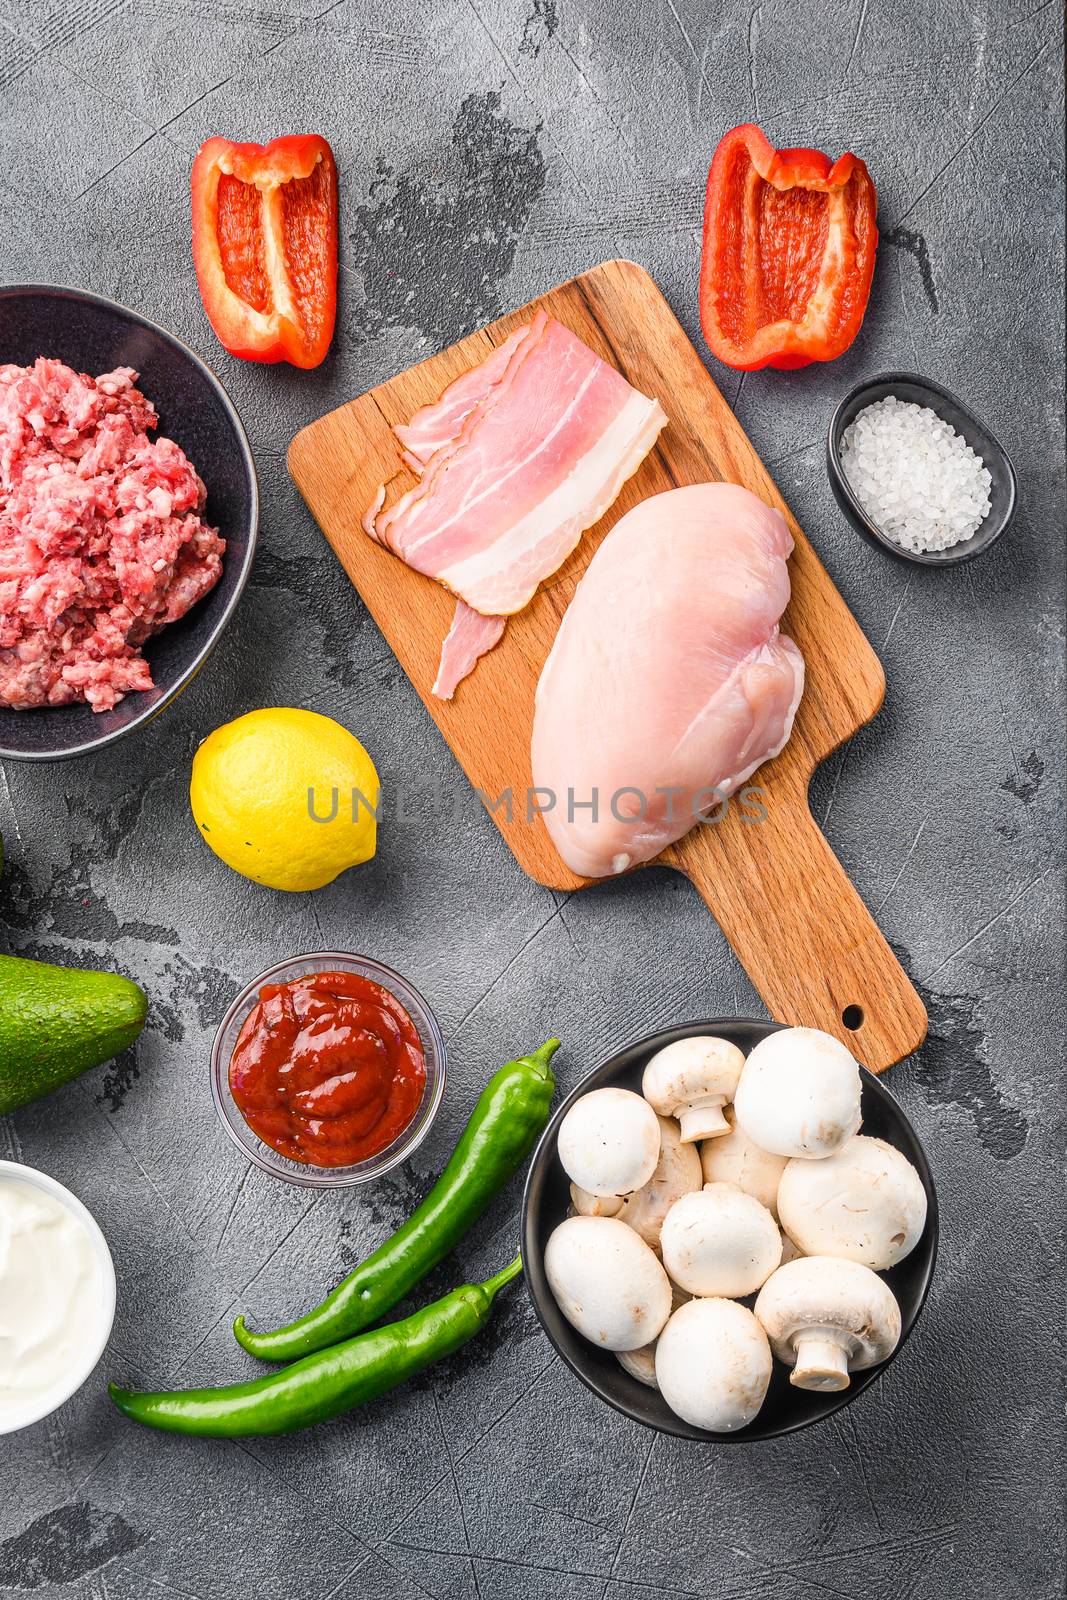 Ingredients for chicken meat mexican tacos , corn tortillas, chili pepper, avocado, meat on textured grey background, top view. by Ilianesolenyi